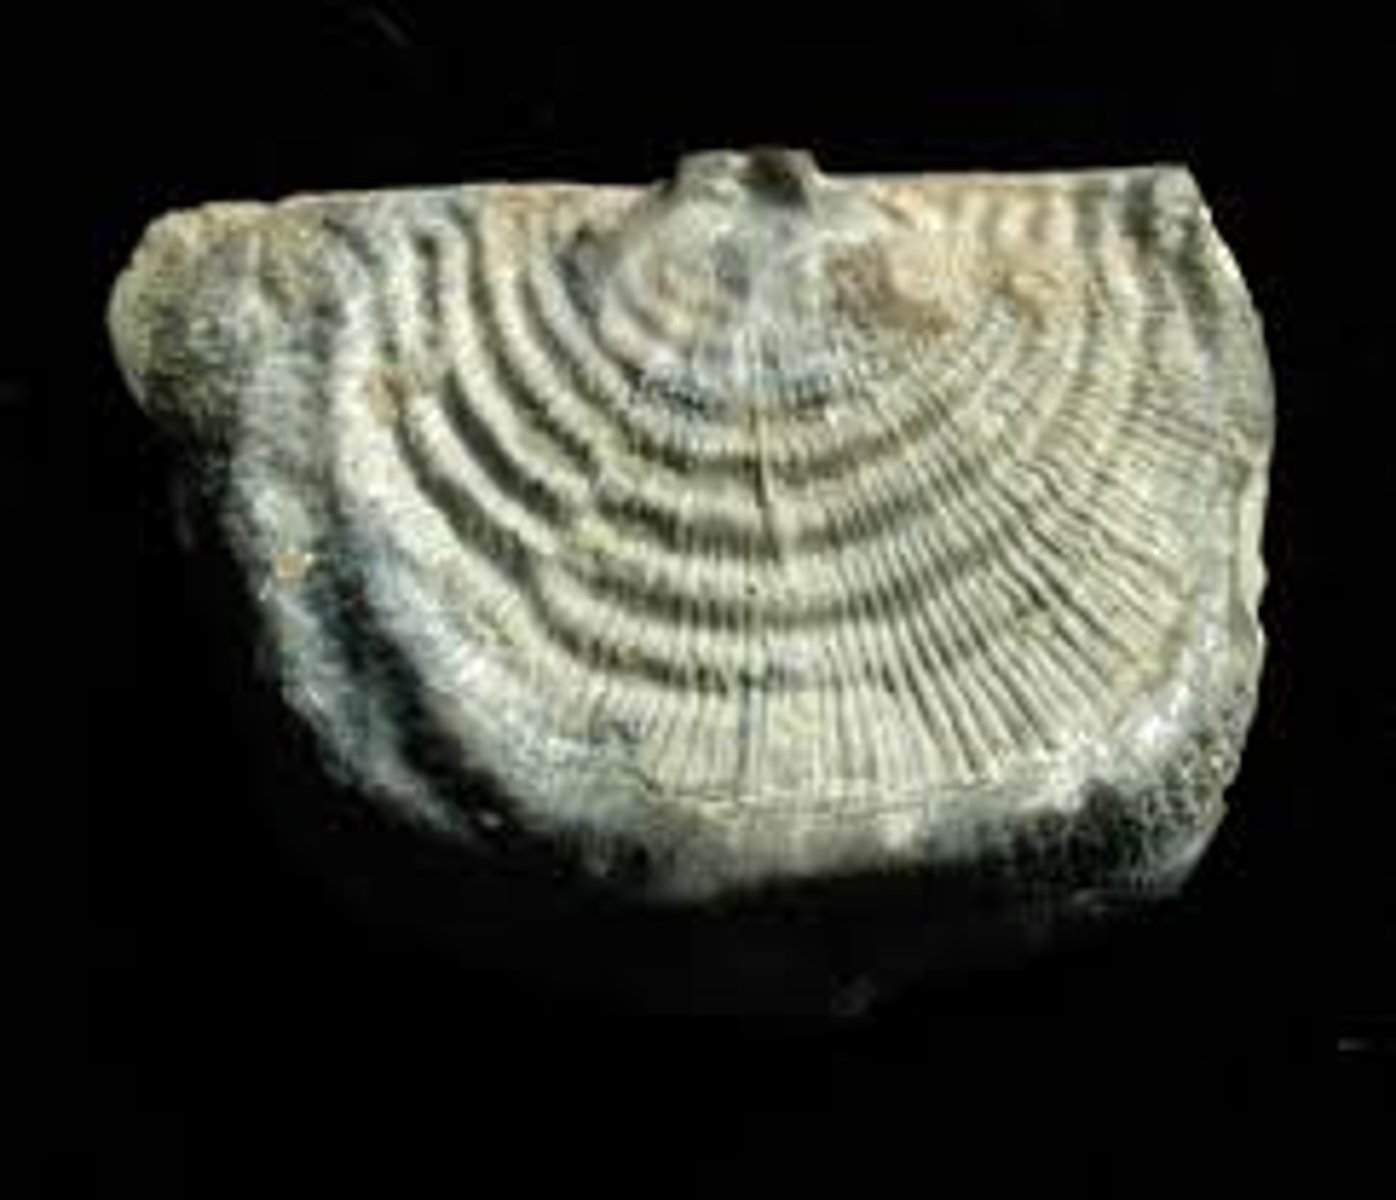 <p>Articulate brachiopod genus</p><p>an extinct genus of mid-sized brachiopod that existed from the Dariwilian epoch to the Emsian epoch, though some specimens have been found in strata as late in age as the Tournasian epoch</p>